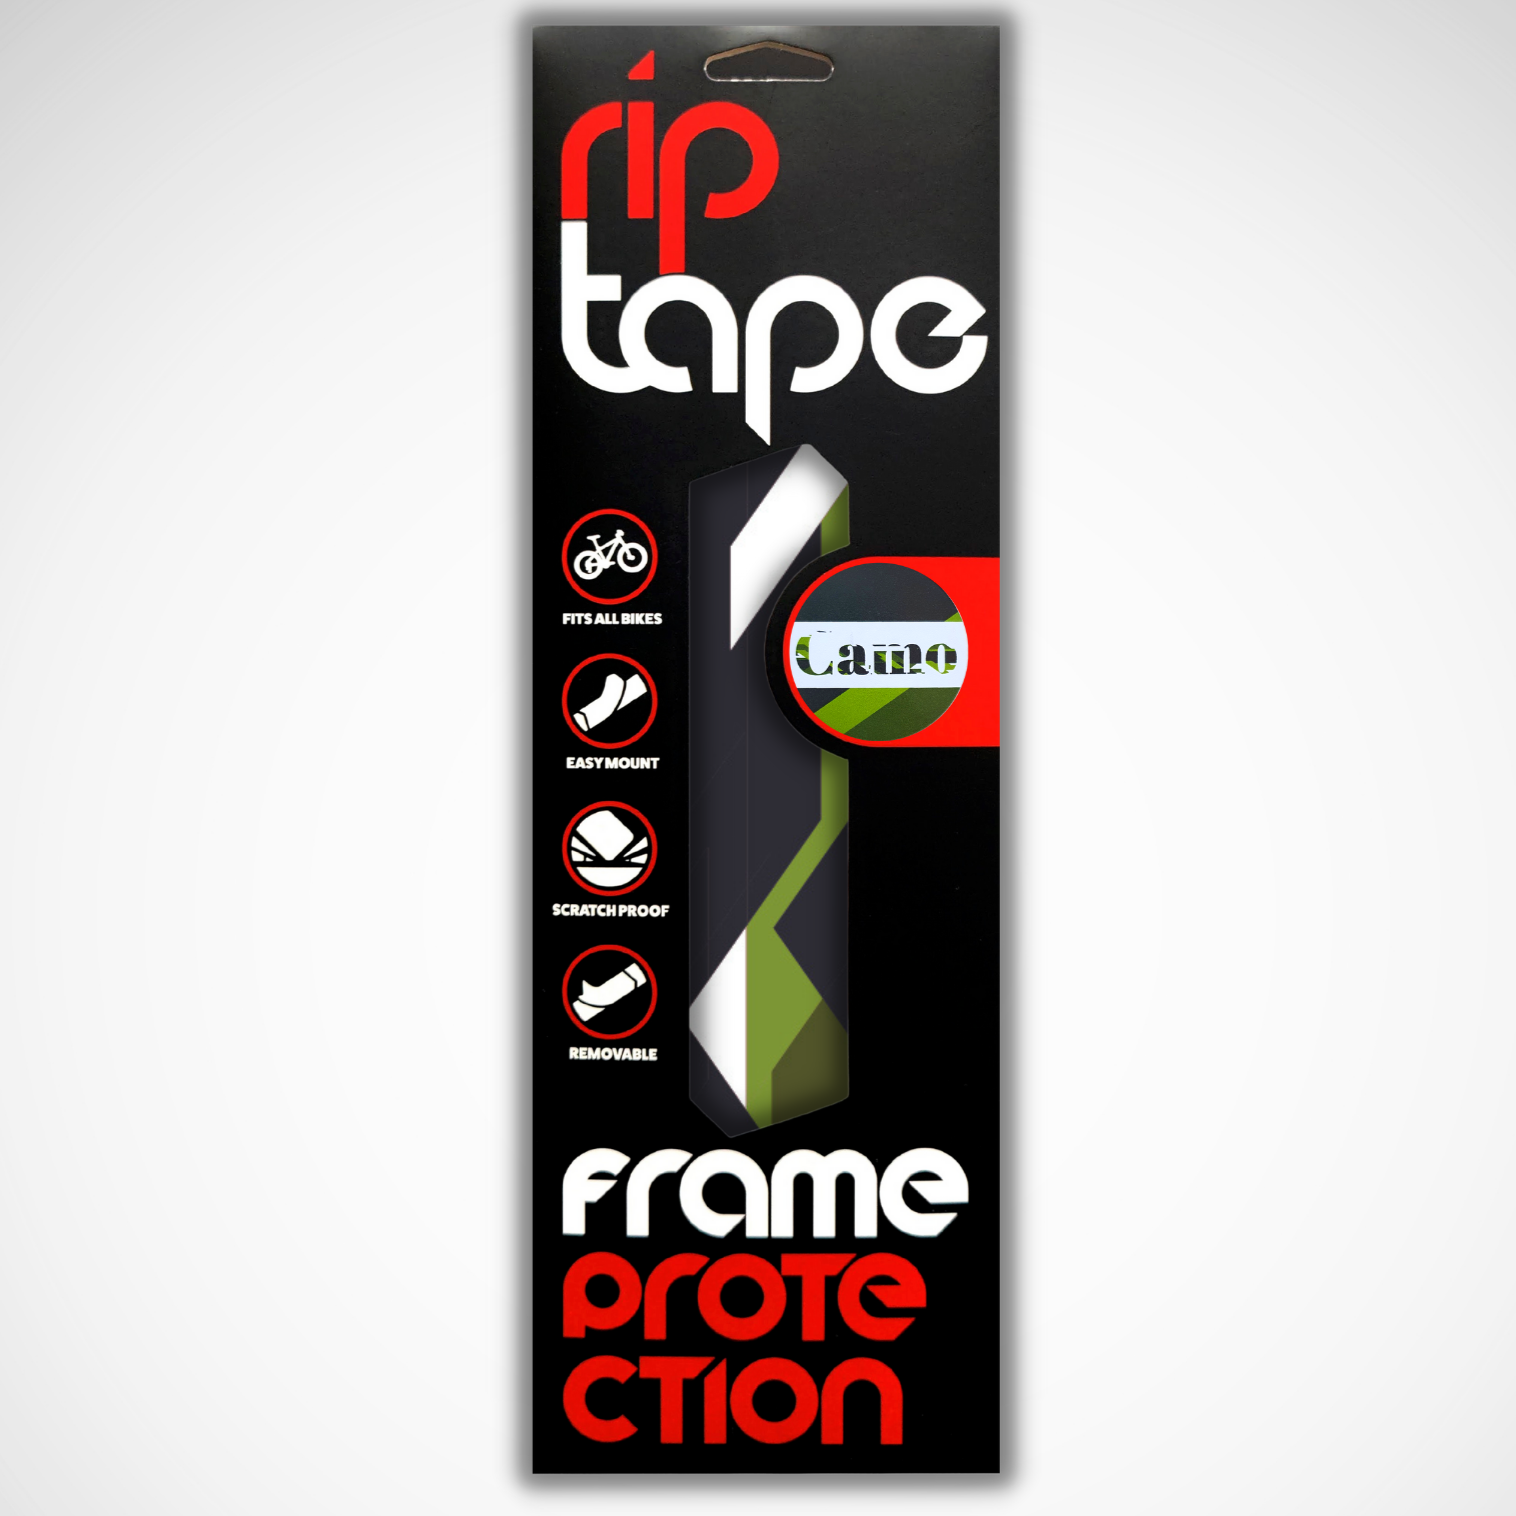 Top Bike Frame Protection for All Bikes